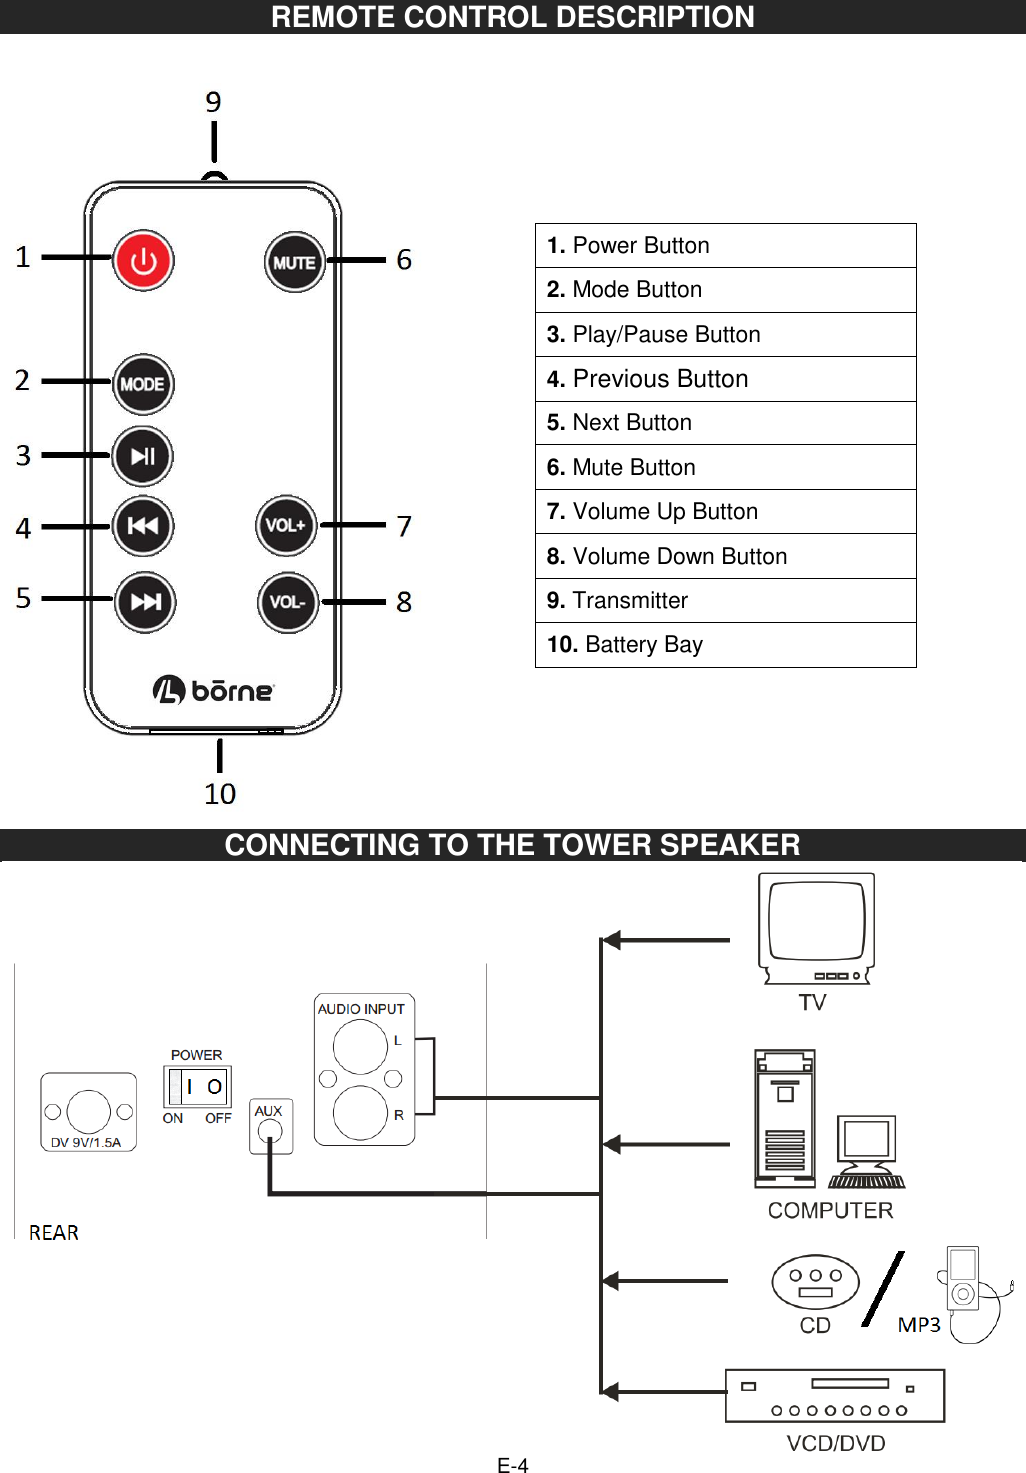   E-4 REMOTE CONTROL DESCRIPTION         CONNECTING TO THE TOWER SPEAKER  1. Power Button 2. Mode Button  3. Play/Pause Button                       4. Previous Button 5. Next Button                       6. Mute Button    7. Volume Up Button 8. Volume Down Button 9. Transmitter 10. Battery Bay 